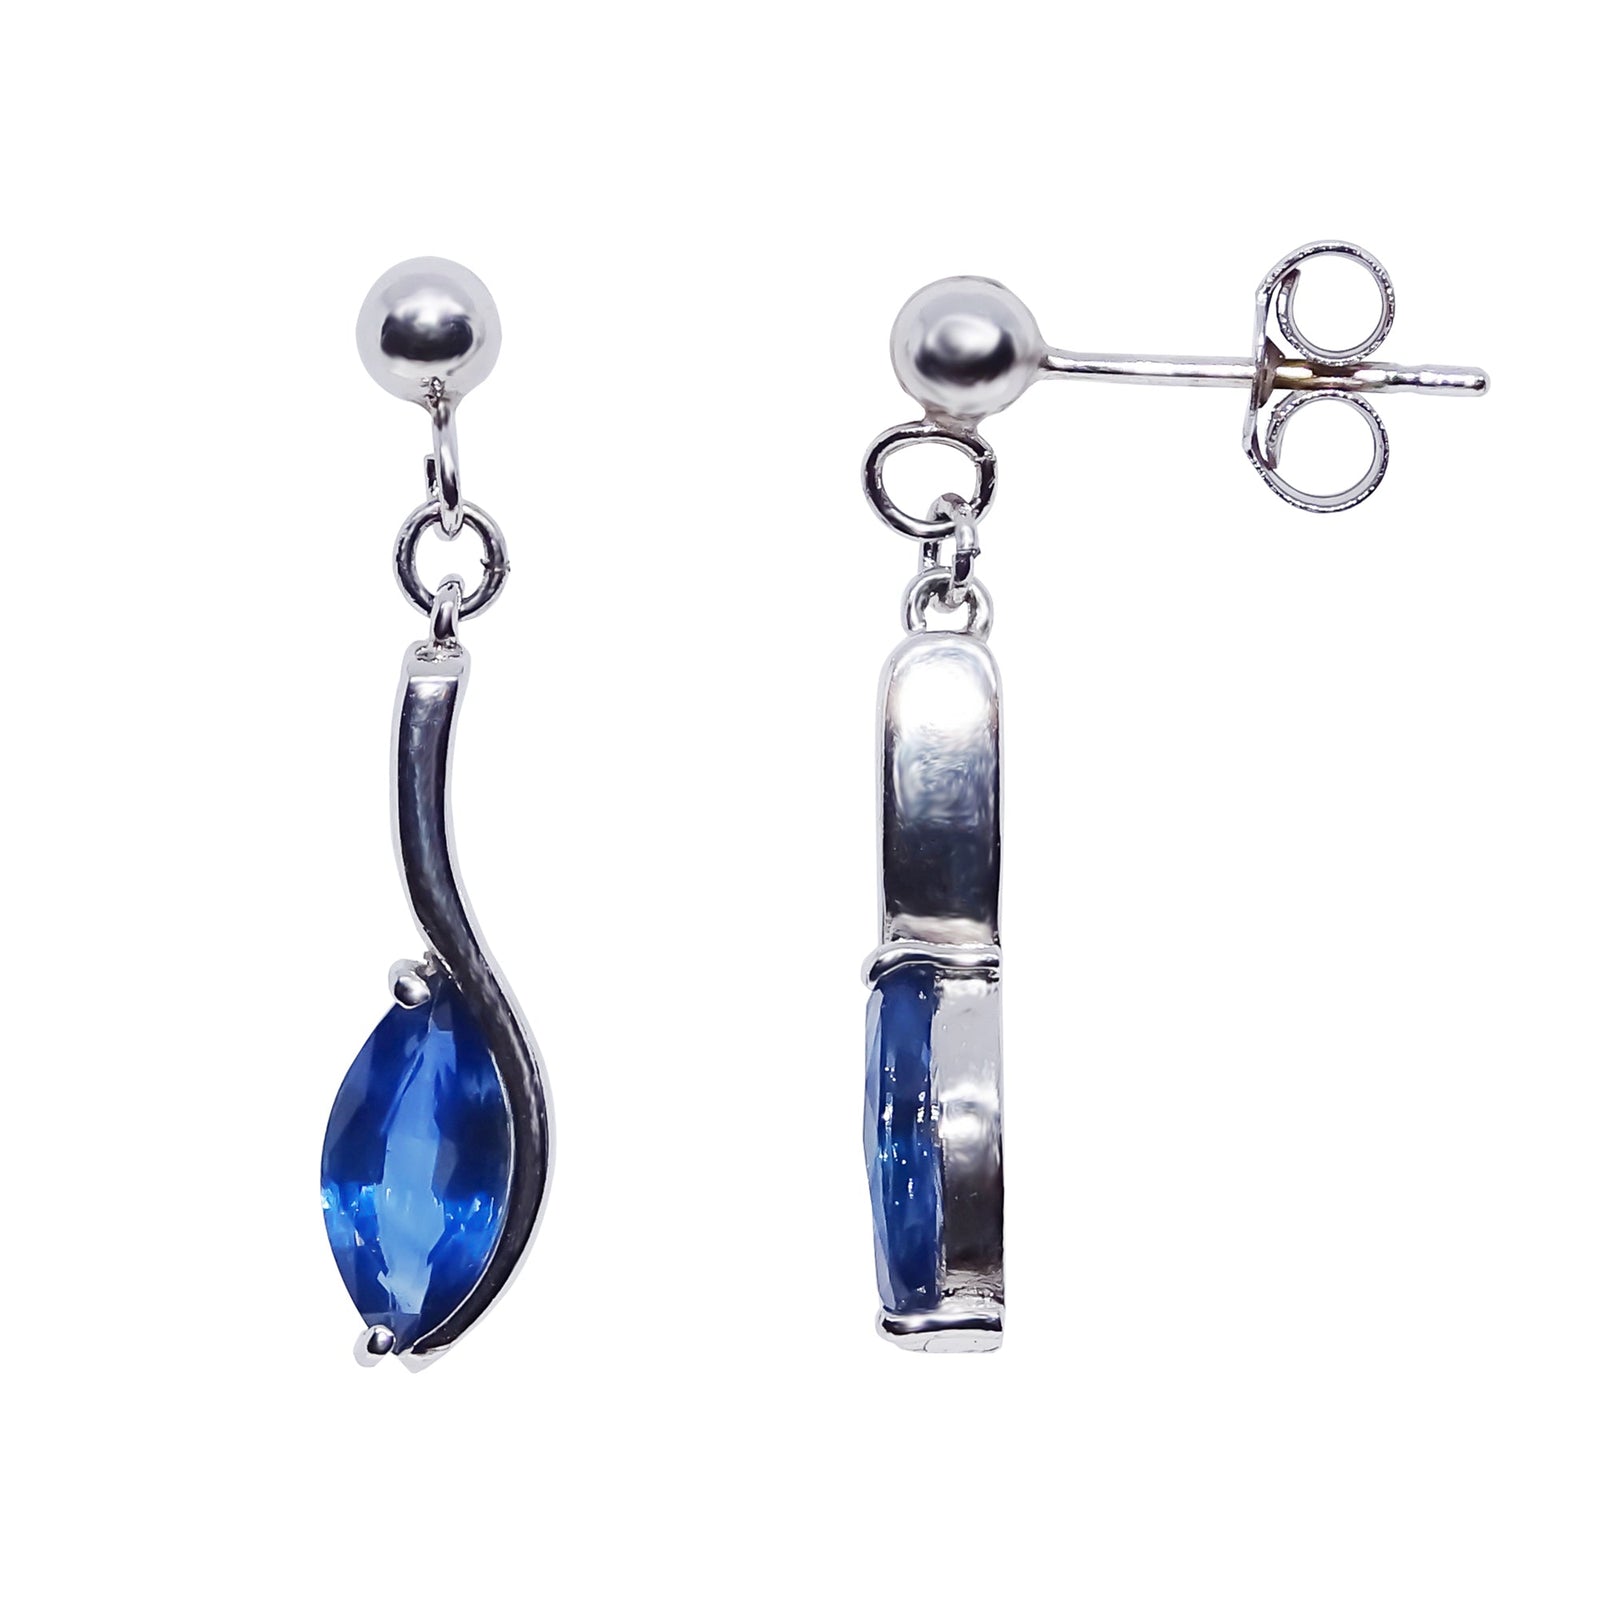 9ct white gold 8x4mm marquise shape sapphire drop earrings